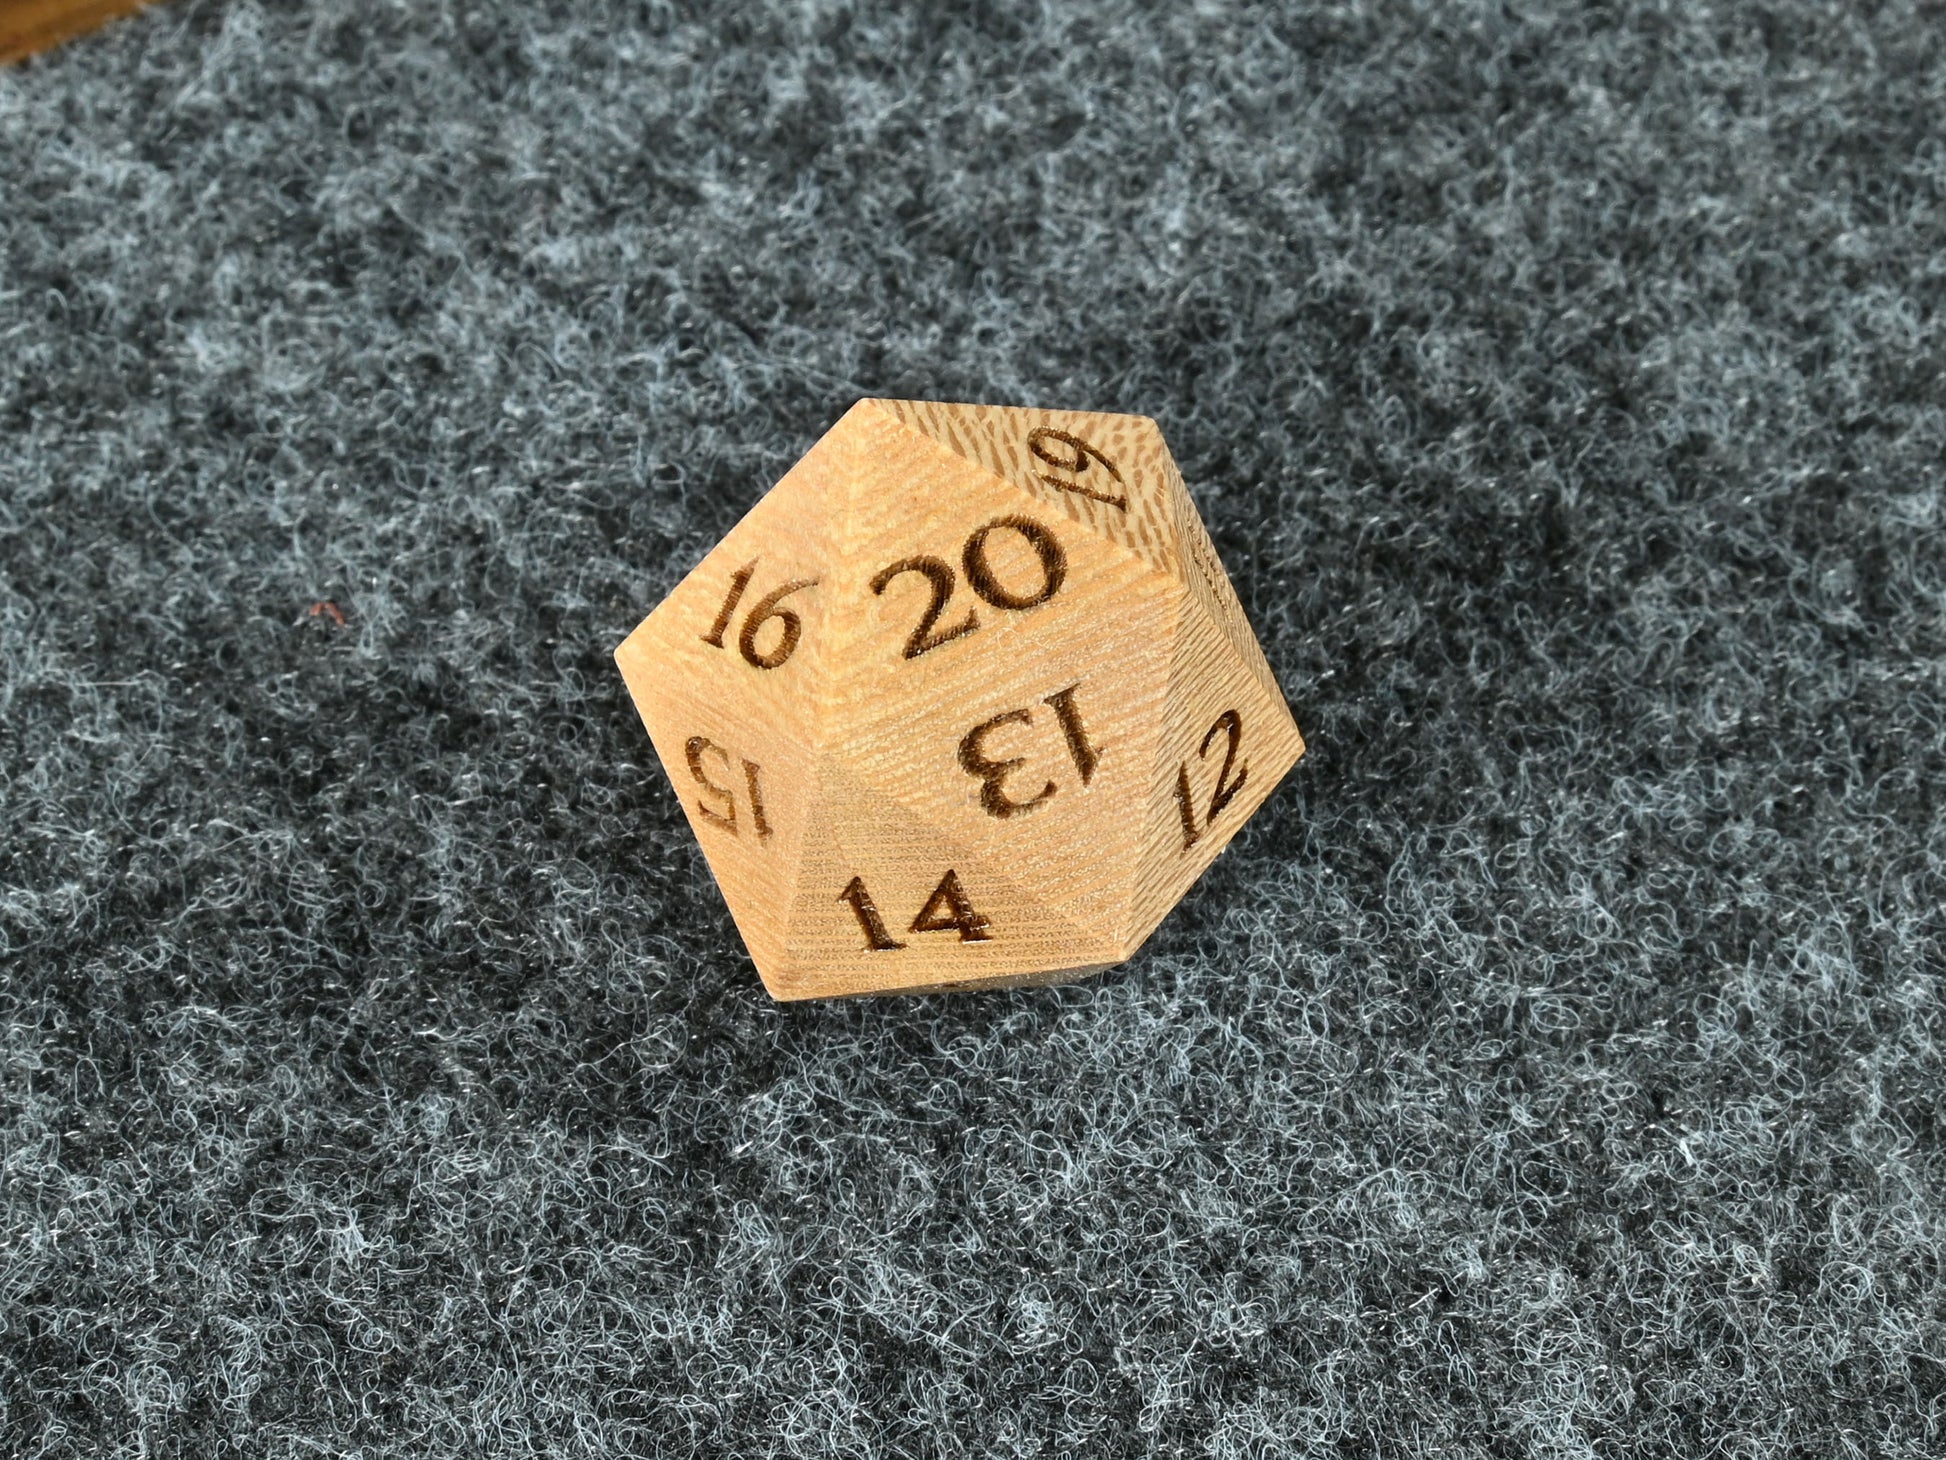 Sycamore wood spindown d20